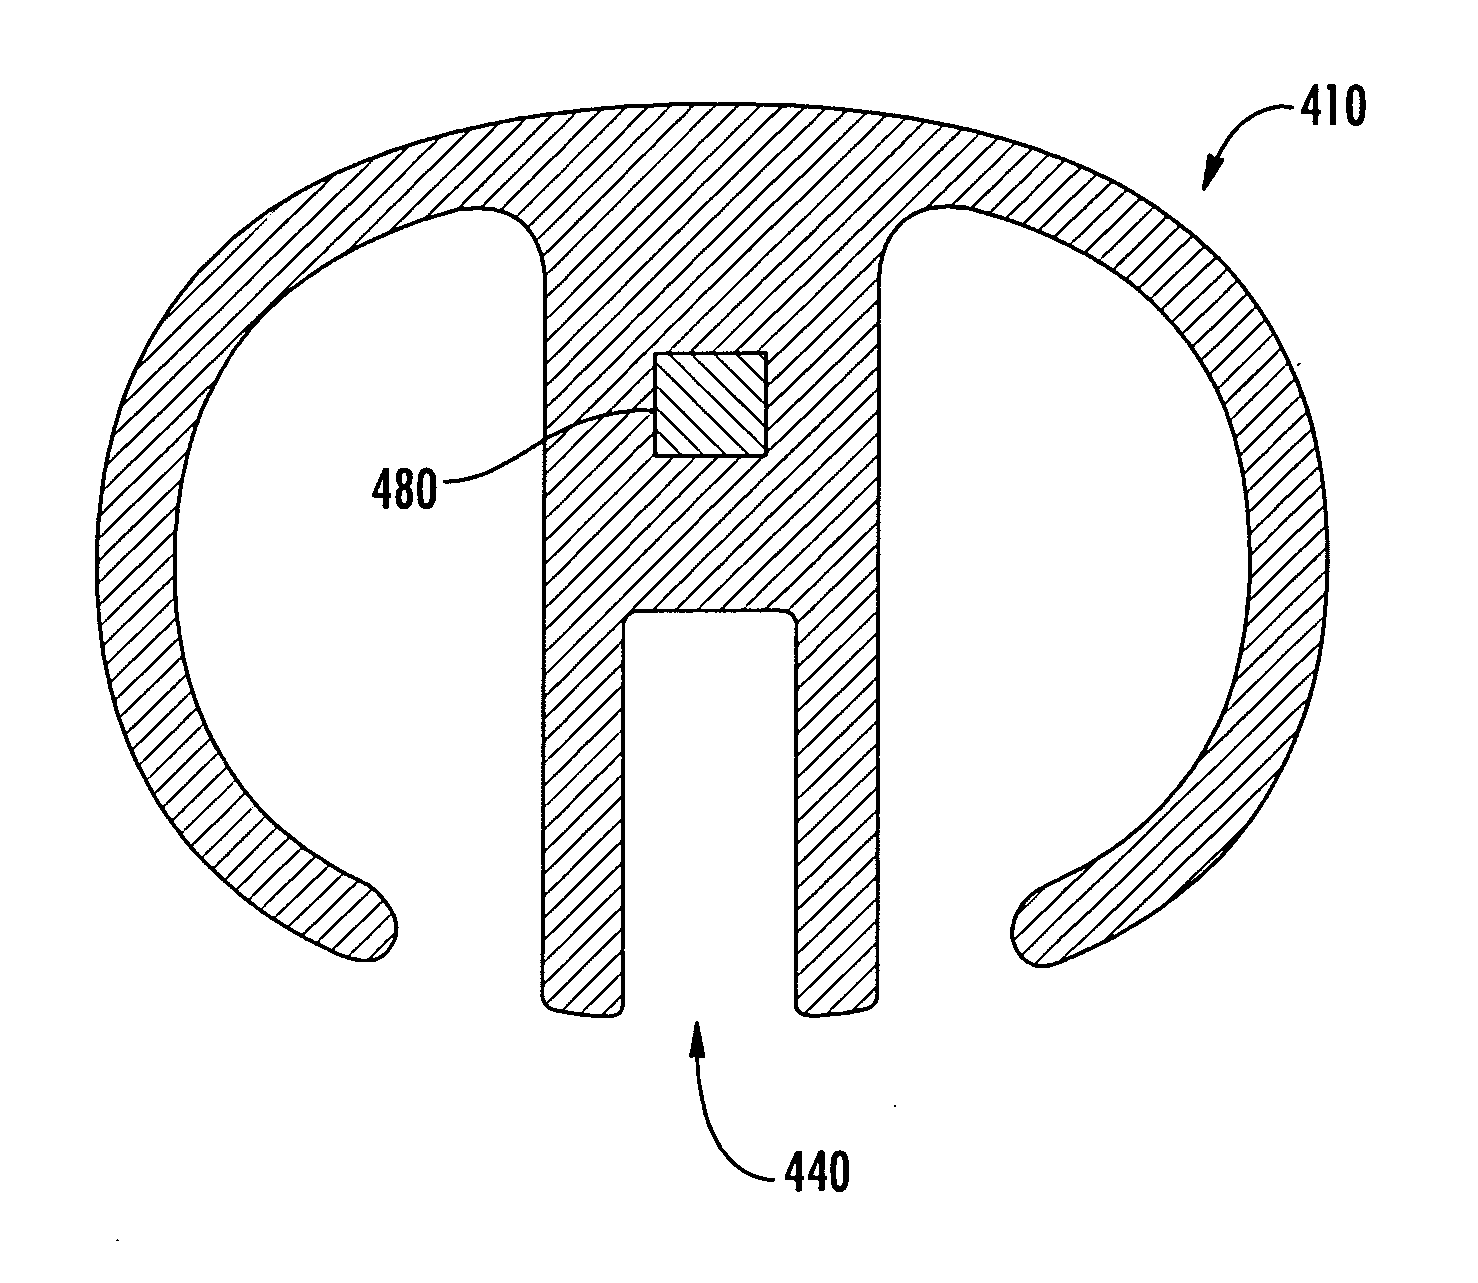 Intraoperative joint force measuring device, system and method